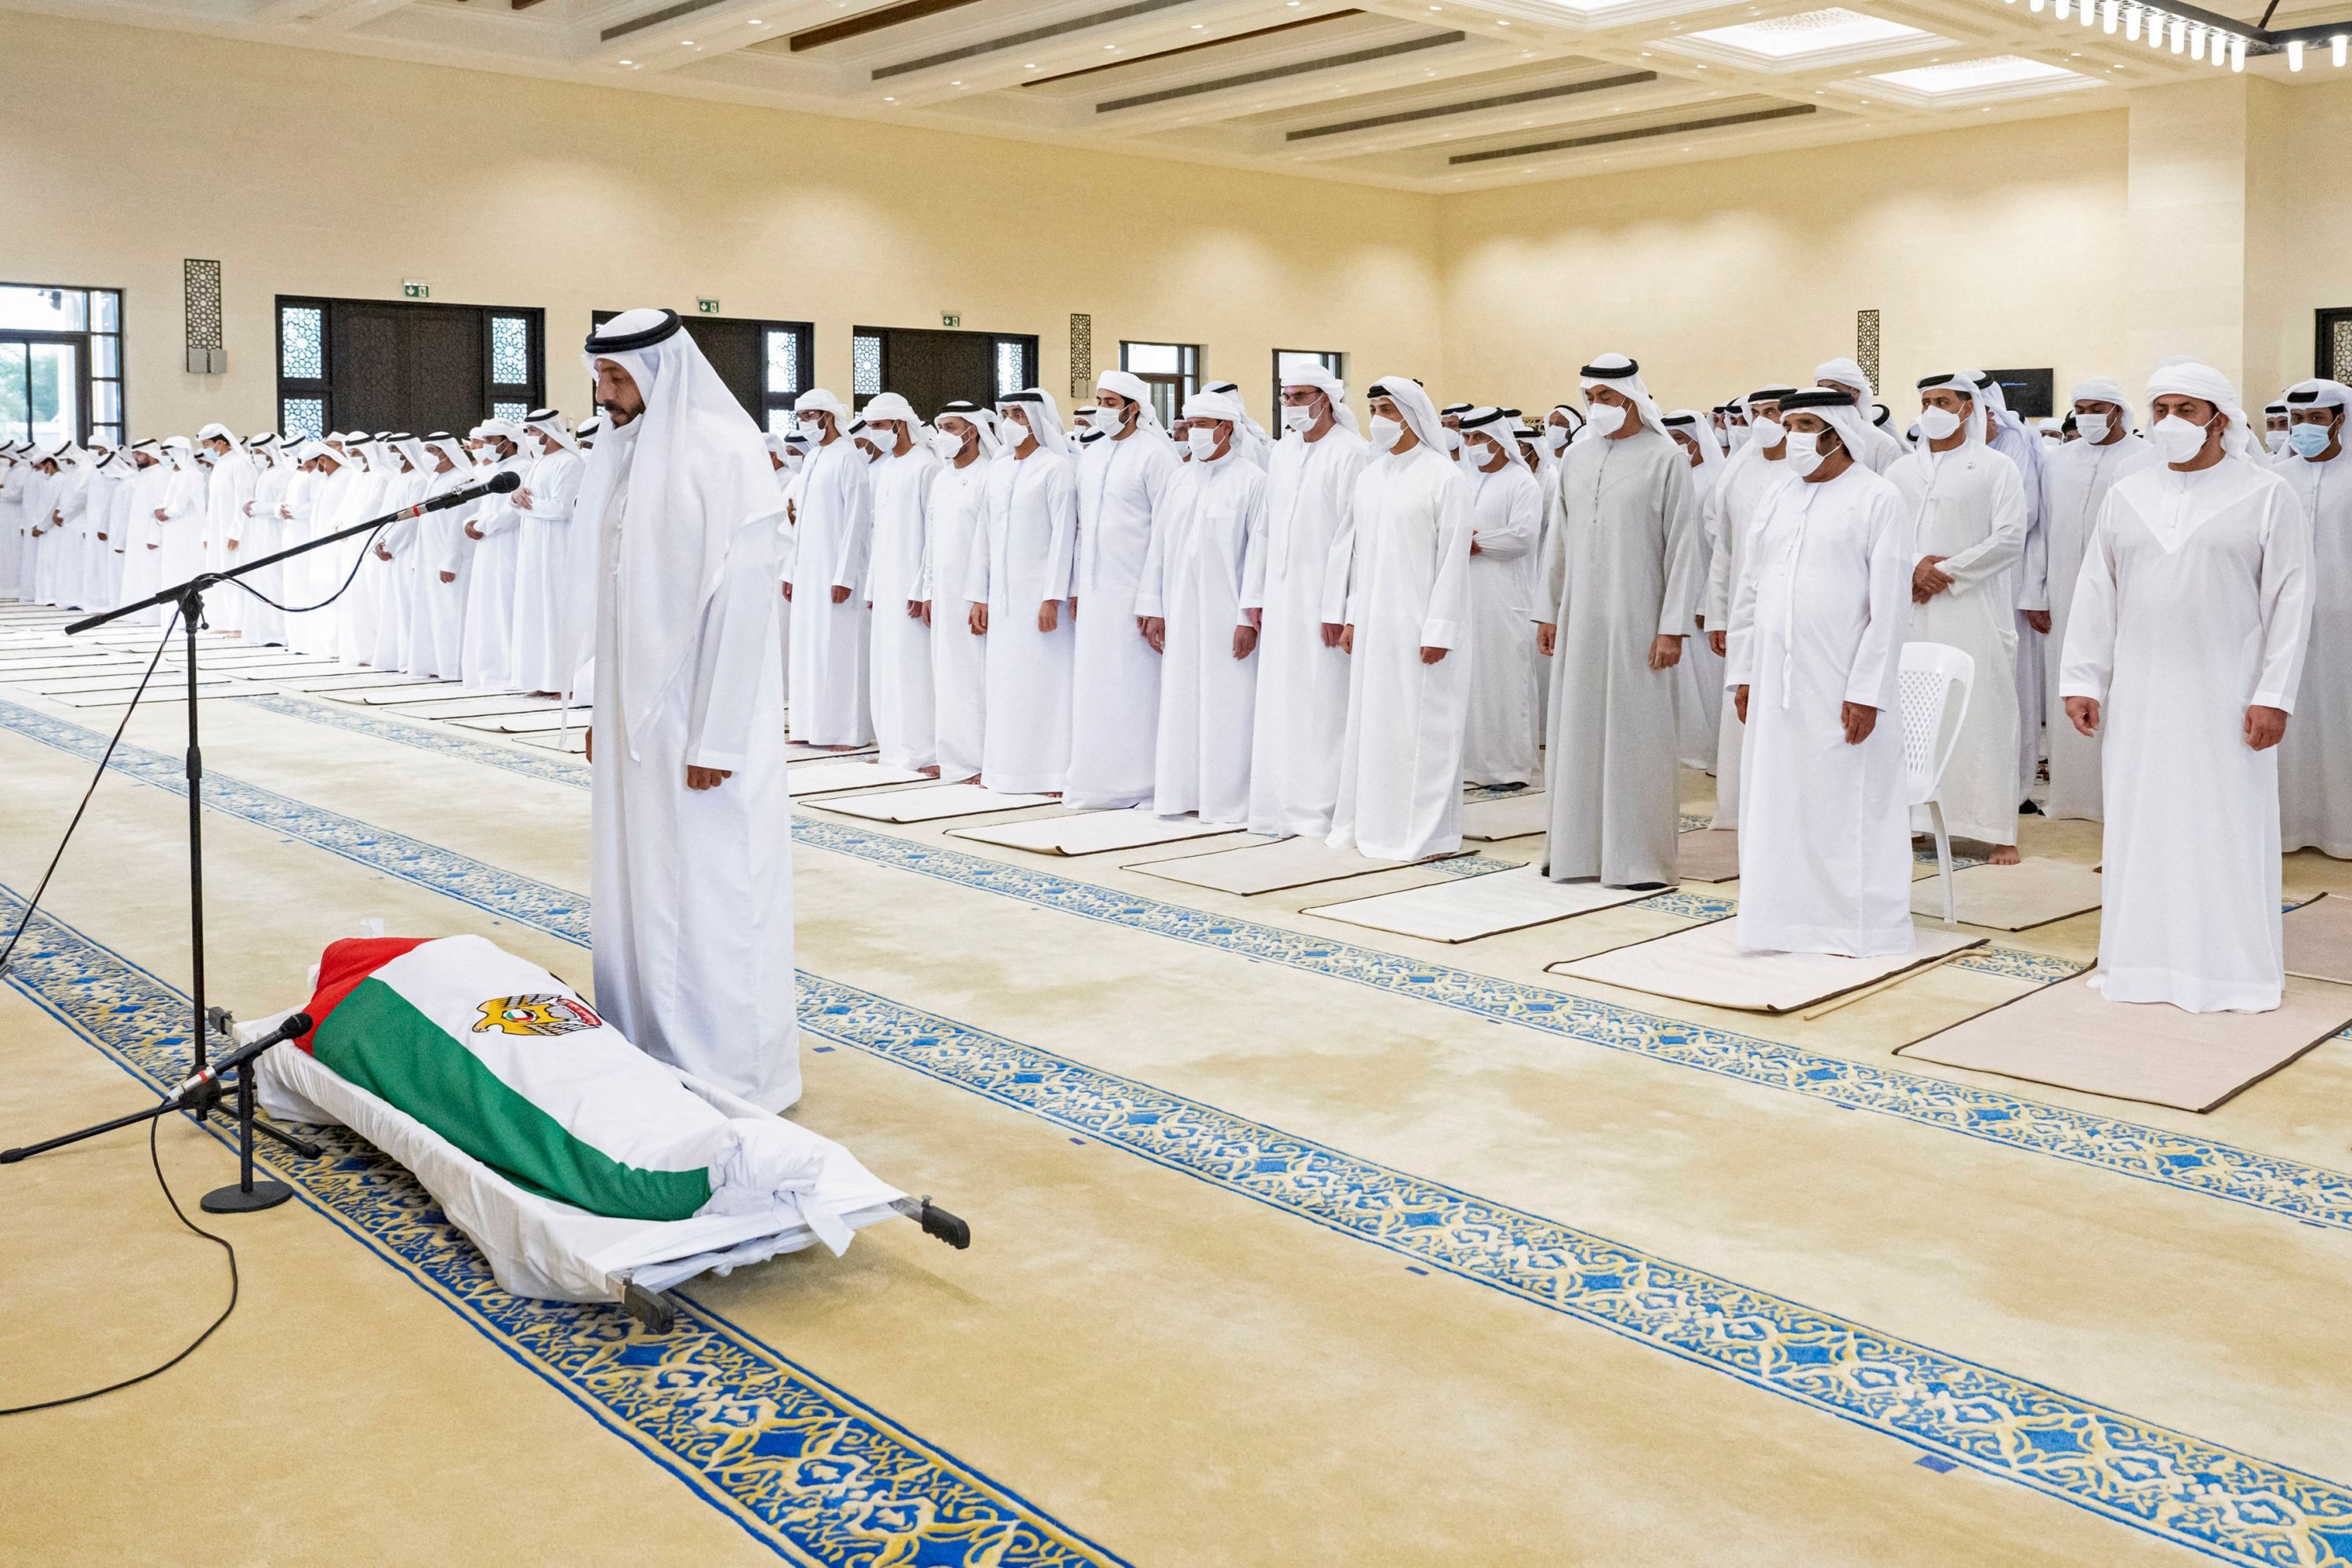 A handout picture released by UAE's Ministry of Presidential Affairs shows Mohamed bin Zayed al-Nahyan (R), Crown Prince of Abu Dhabi and Deputy Supreme Commander of the UAE Armed Forces, taking part in a funeral prayer for late UAE's President Sheikh Khalifa bin Zayed Al Nahyan at a mosque in Abu Dhabi on May 13, 2022. (Photo by Hamad al-Kaabi / Ministry of Presidential Affairs / AFP) /